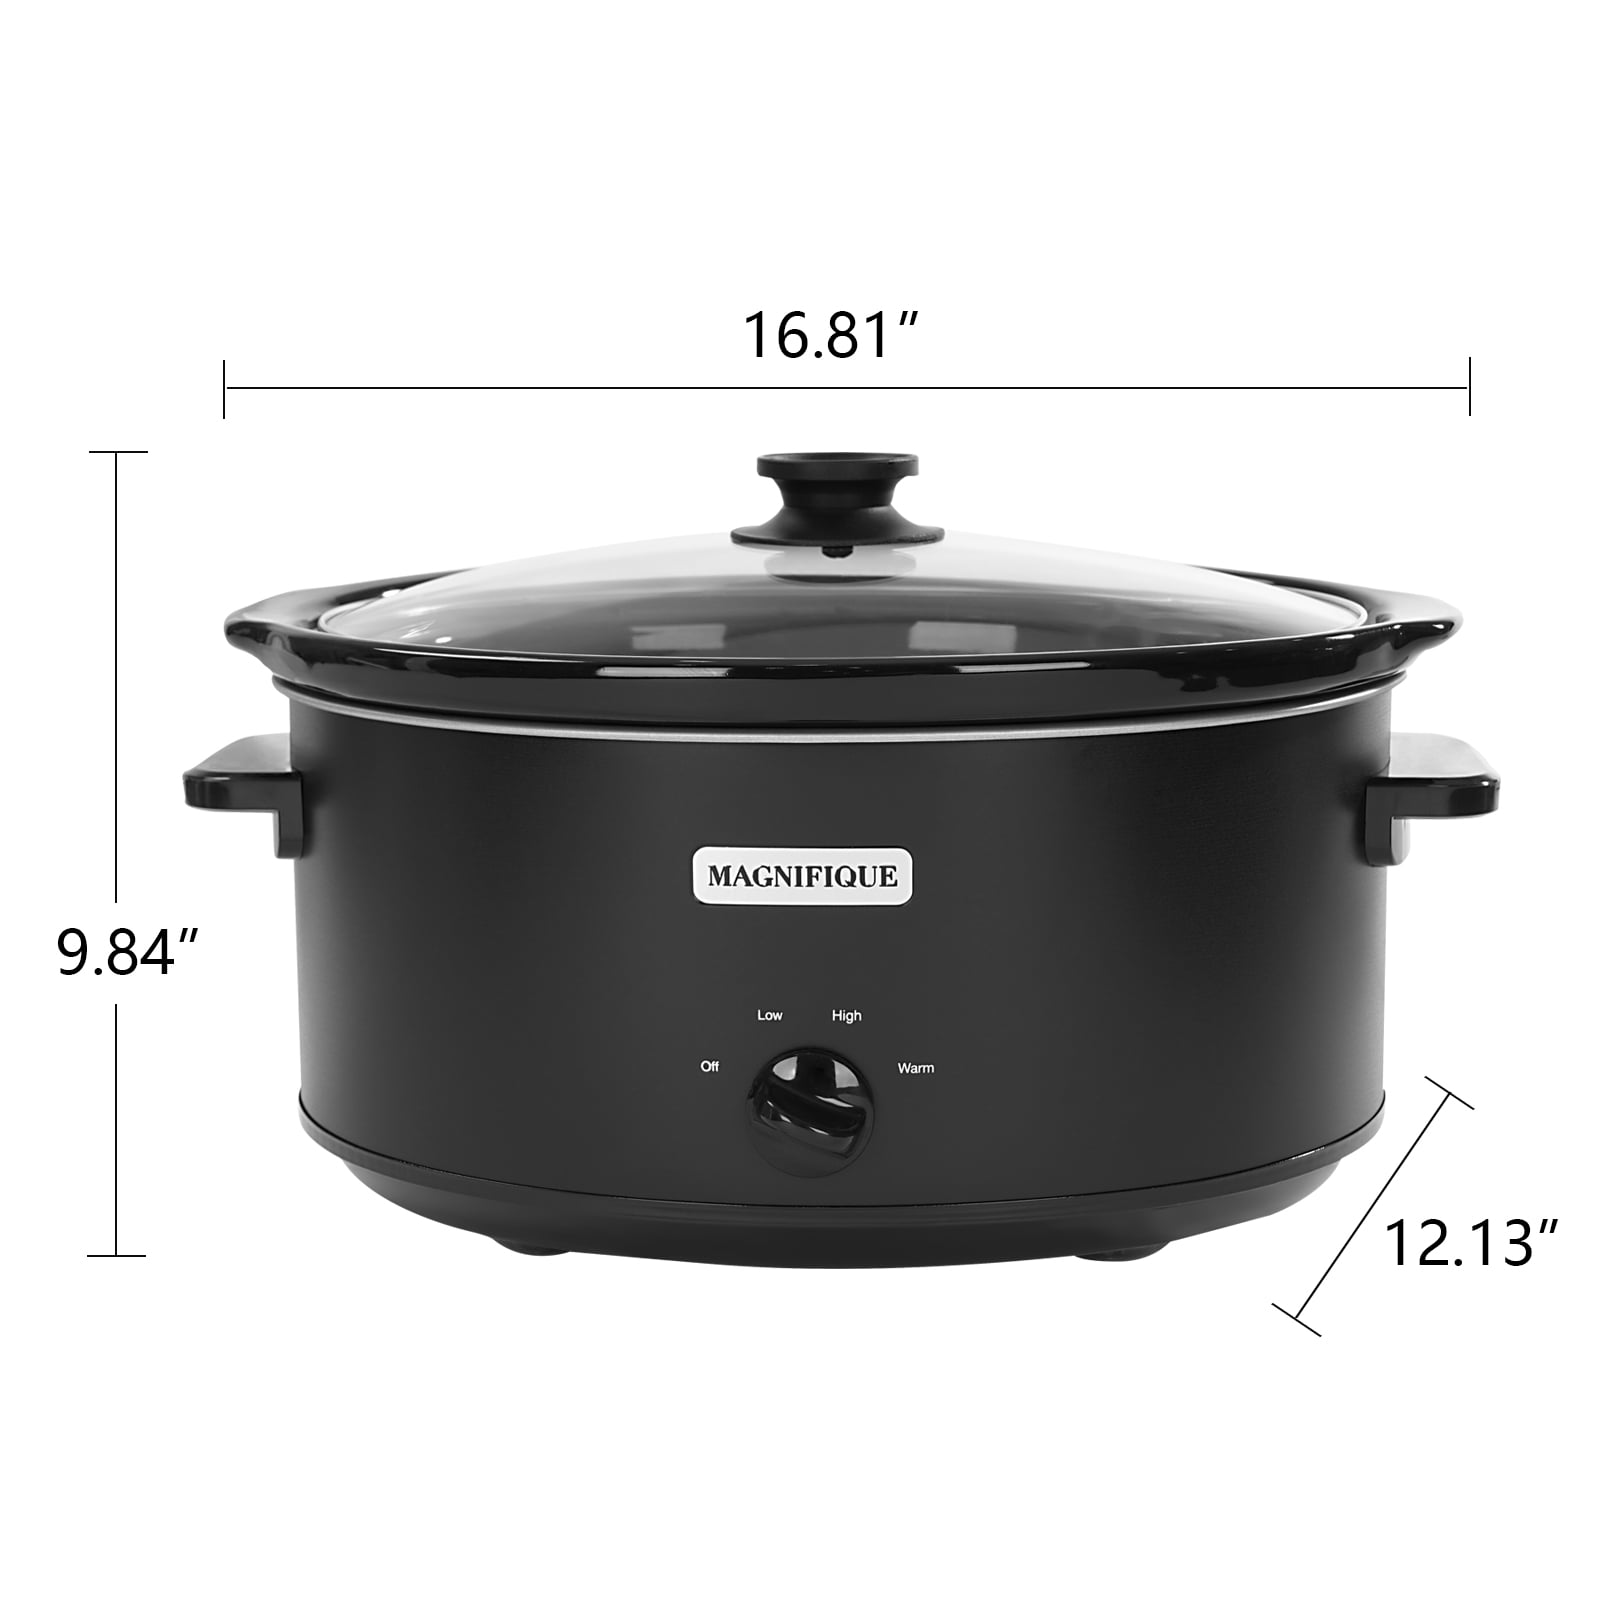 MAGNIFIQUE Oval Digital Slow Cooker with Keep Warm Setting - Perfect  Kitchen Small Appliance for Family Dinners (Stainless Steel Manual, 8 Qt)